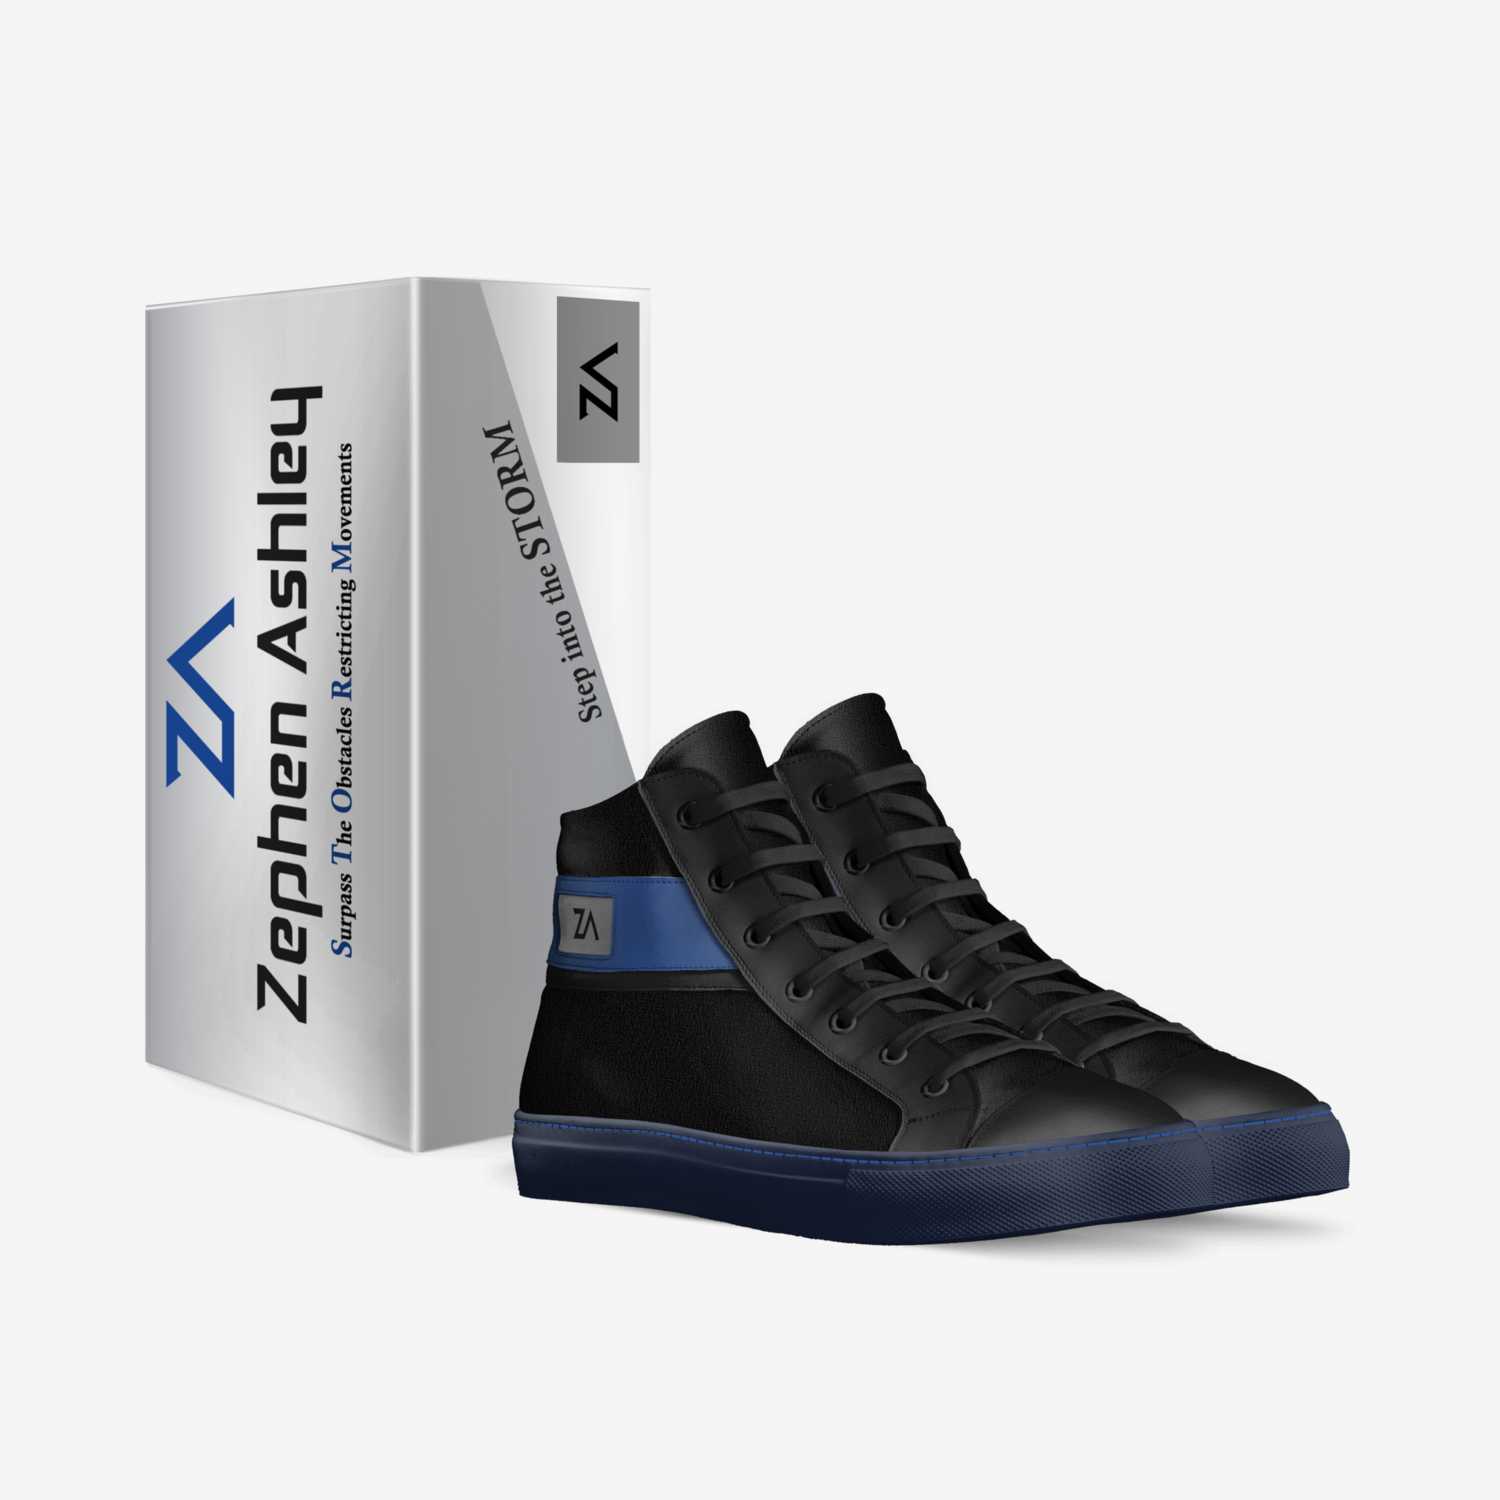 Zephen Ashley custom made in Italy shoes by Realitie Rollings | Box view